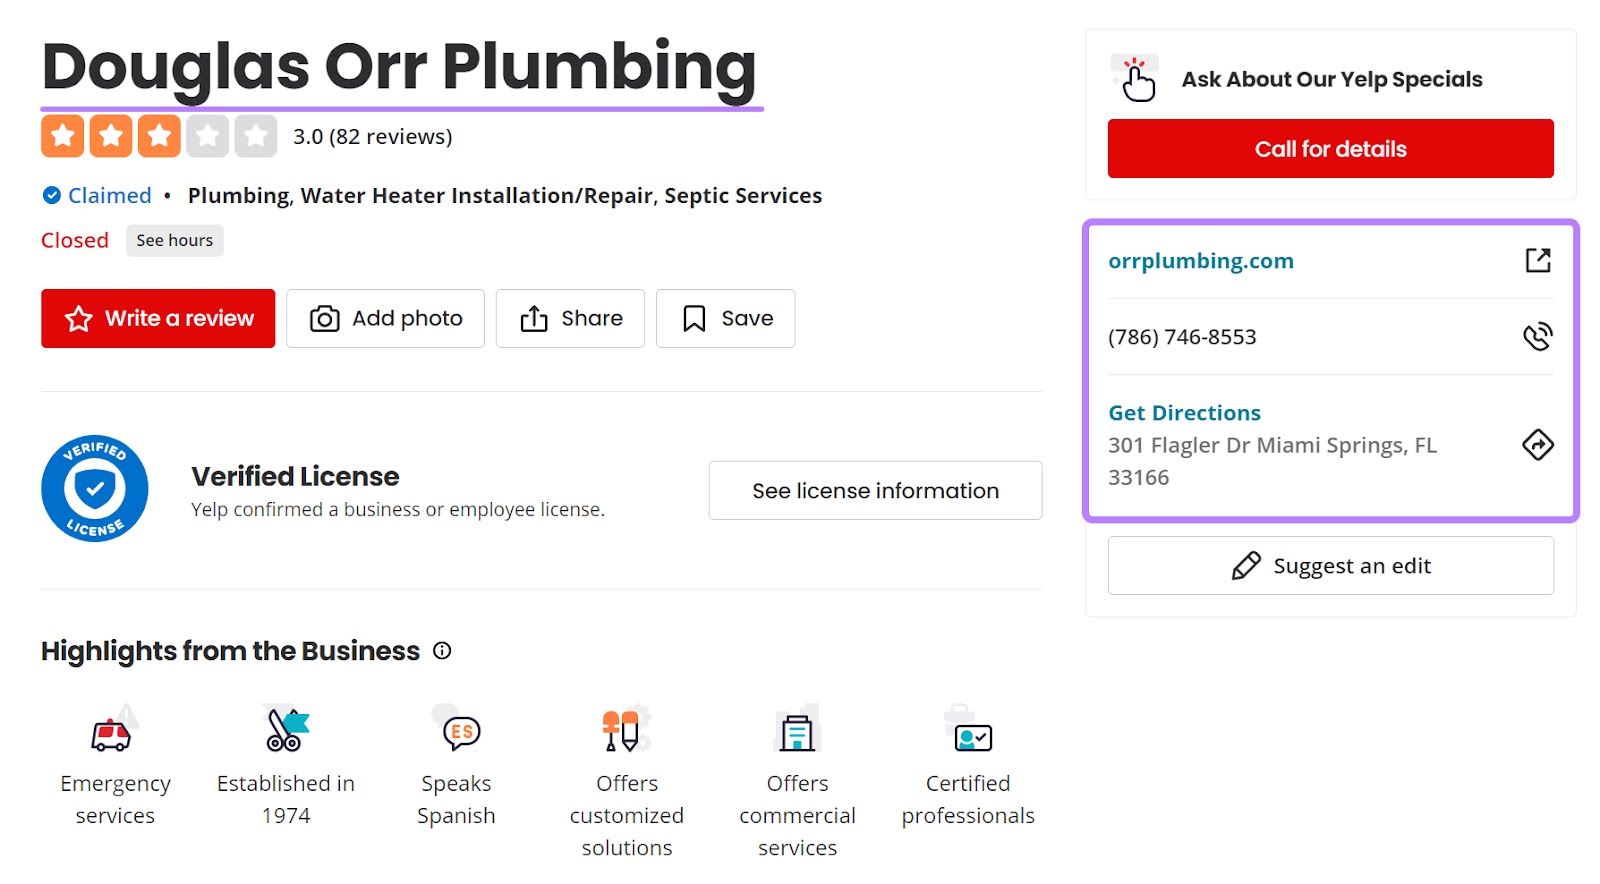 Douglas Orr Plumbing listing on Yelp, with website, phone number and address highlighted